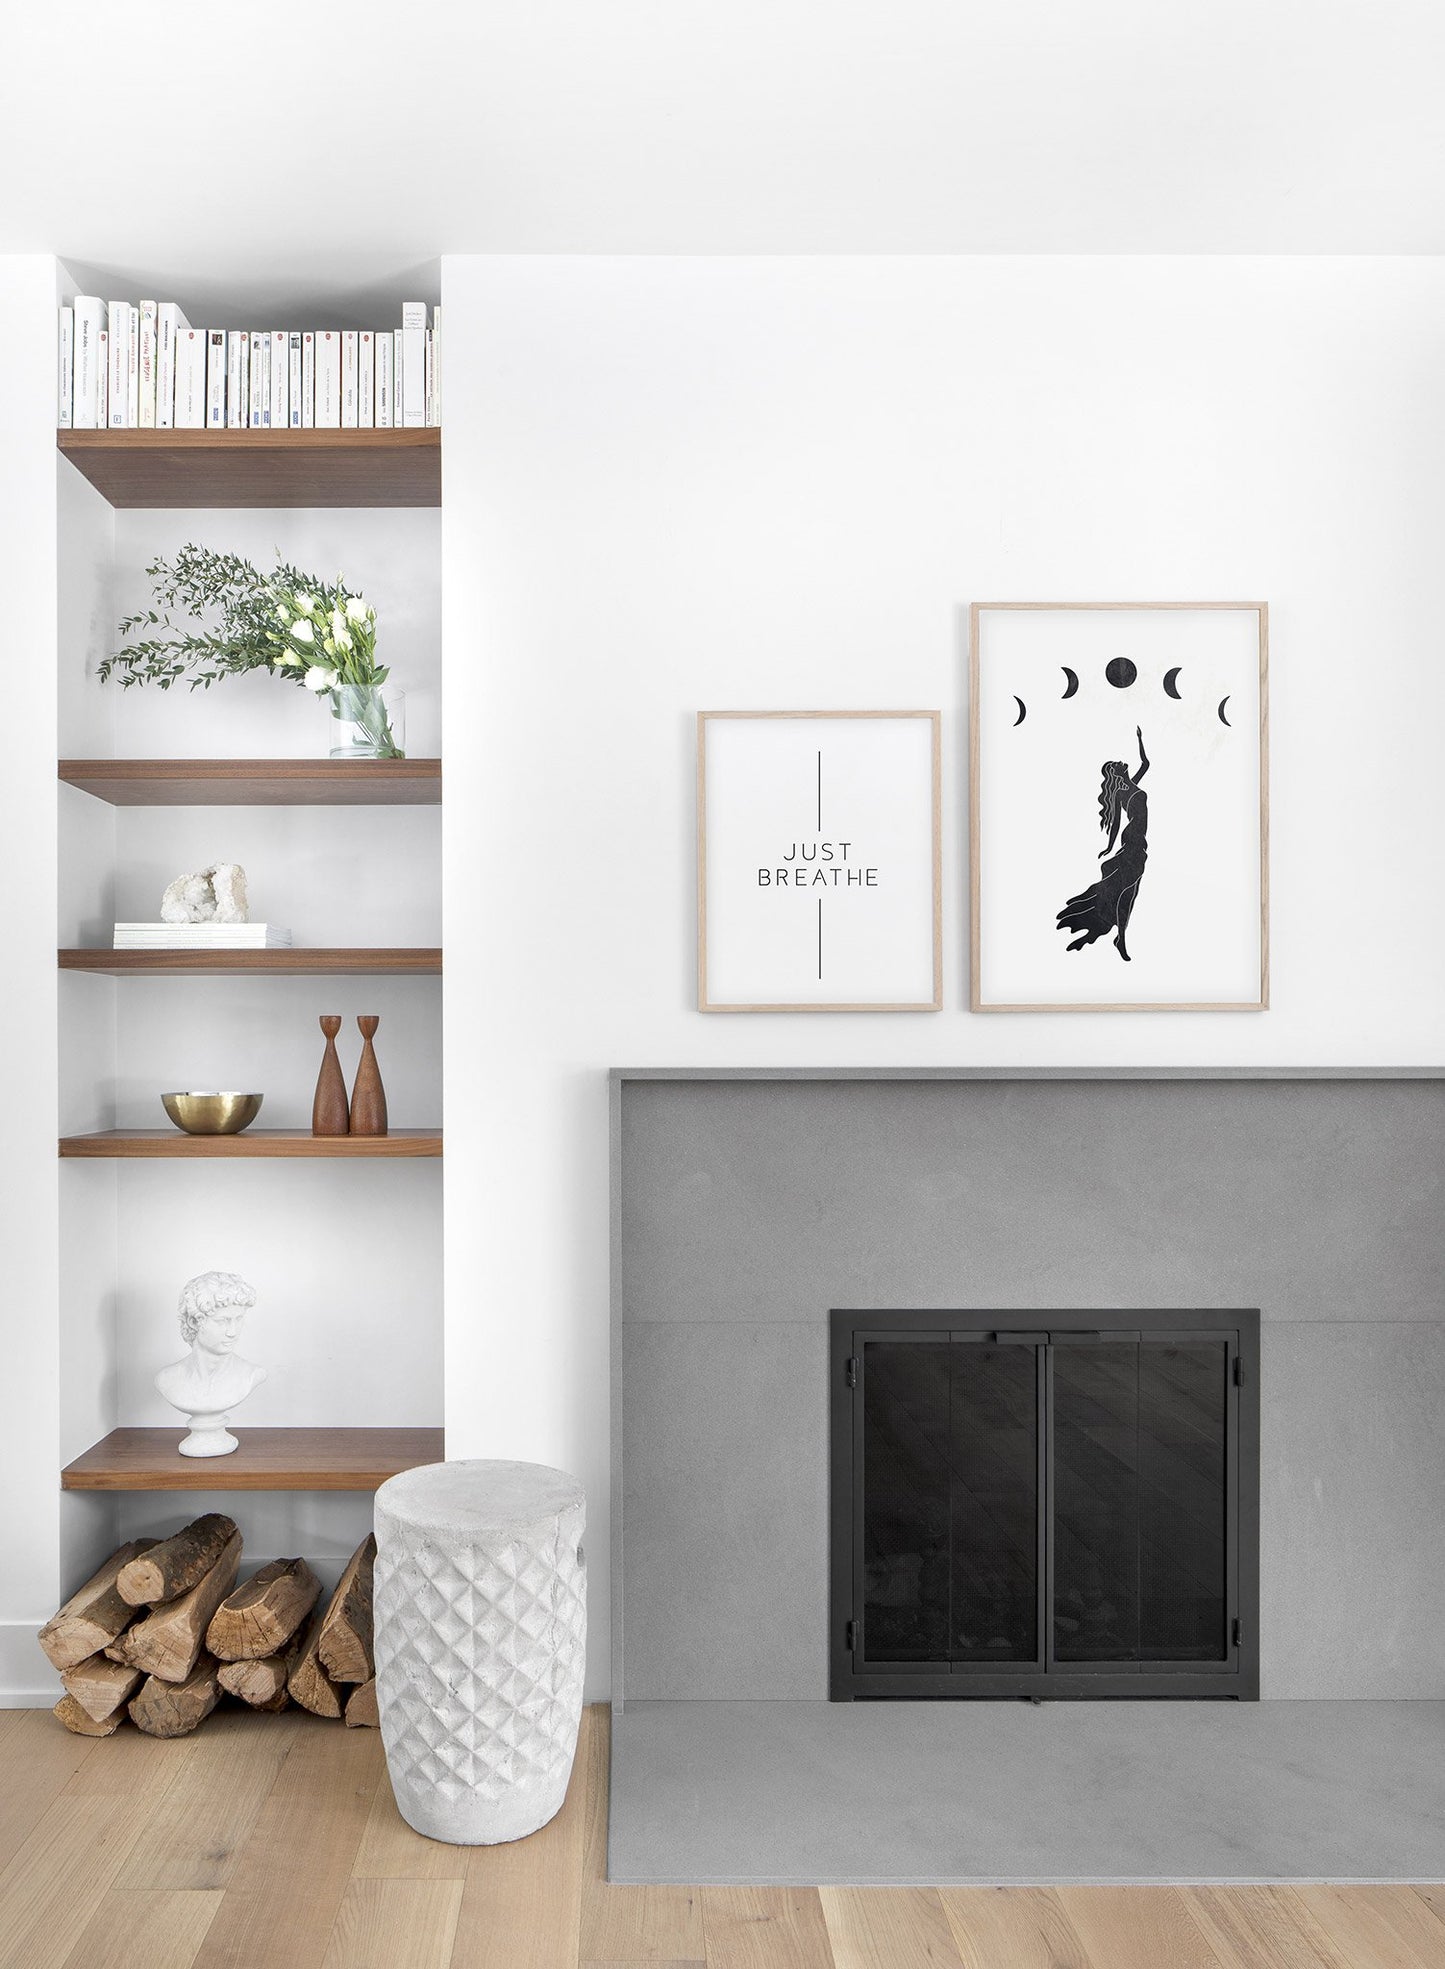 Celestial illustration by Opposite Wall with Selene goddess of moons - Lifestyle Duo - Living Room